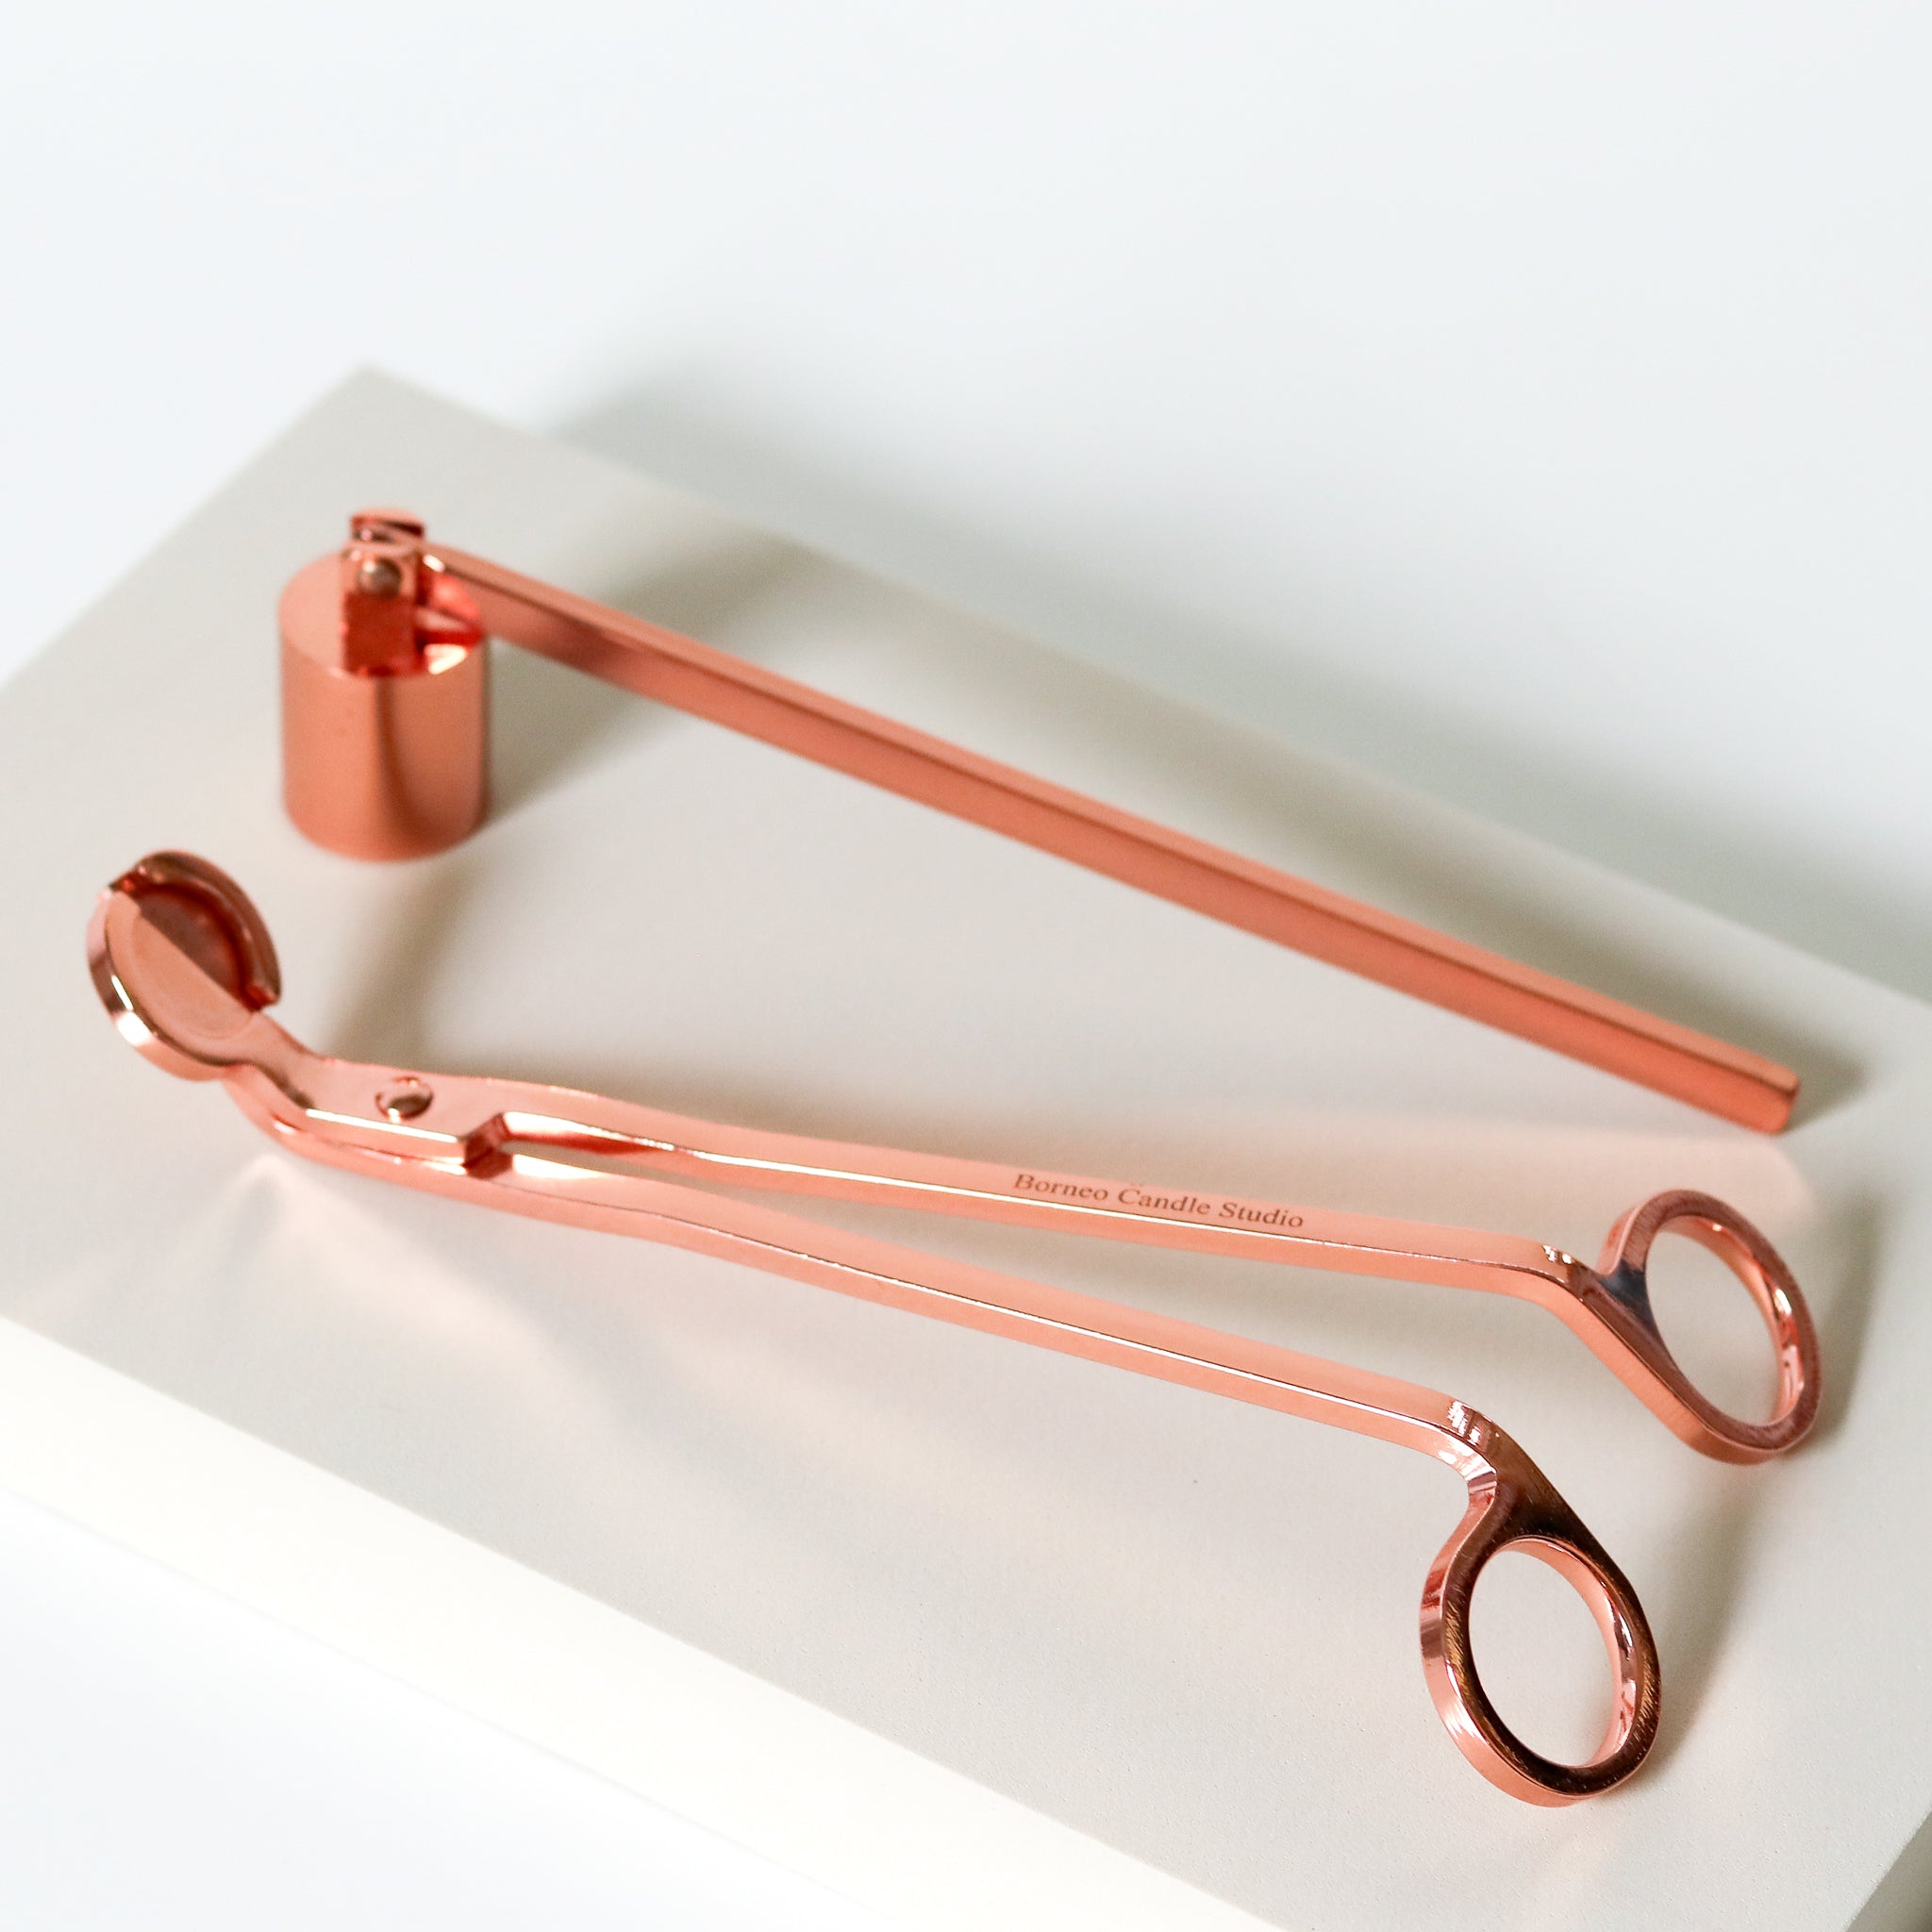 Candle wick trimmer and candle snuffer in rose gold from Borneo Candle Studio